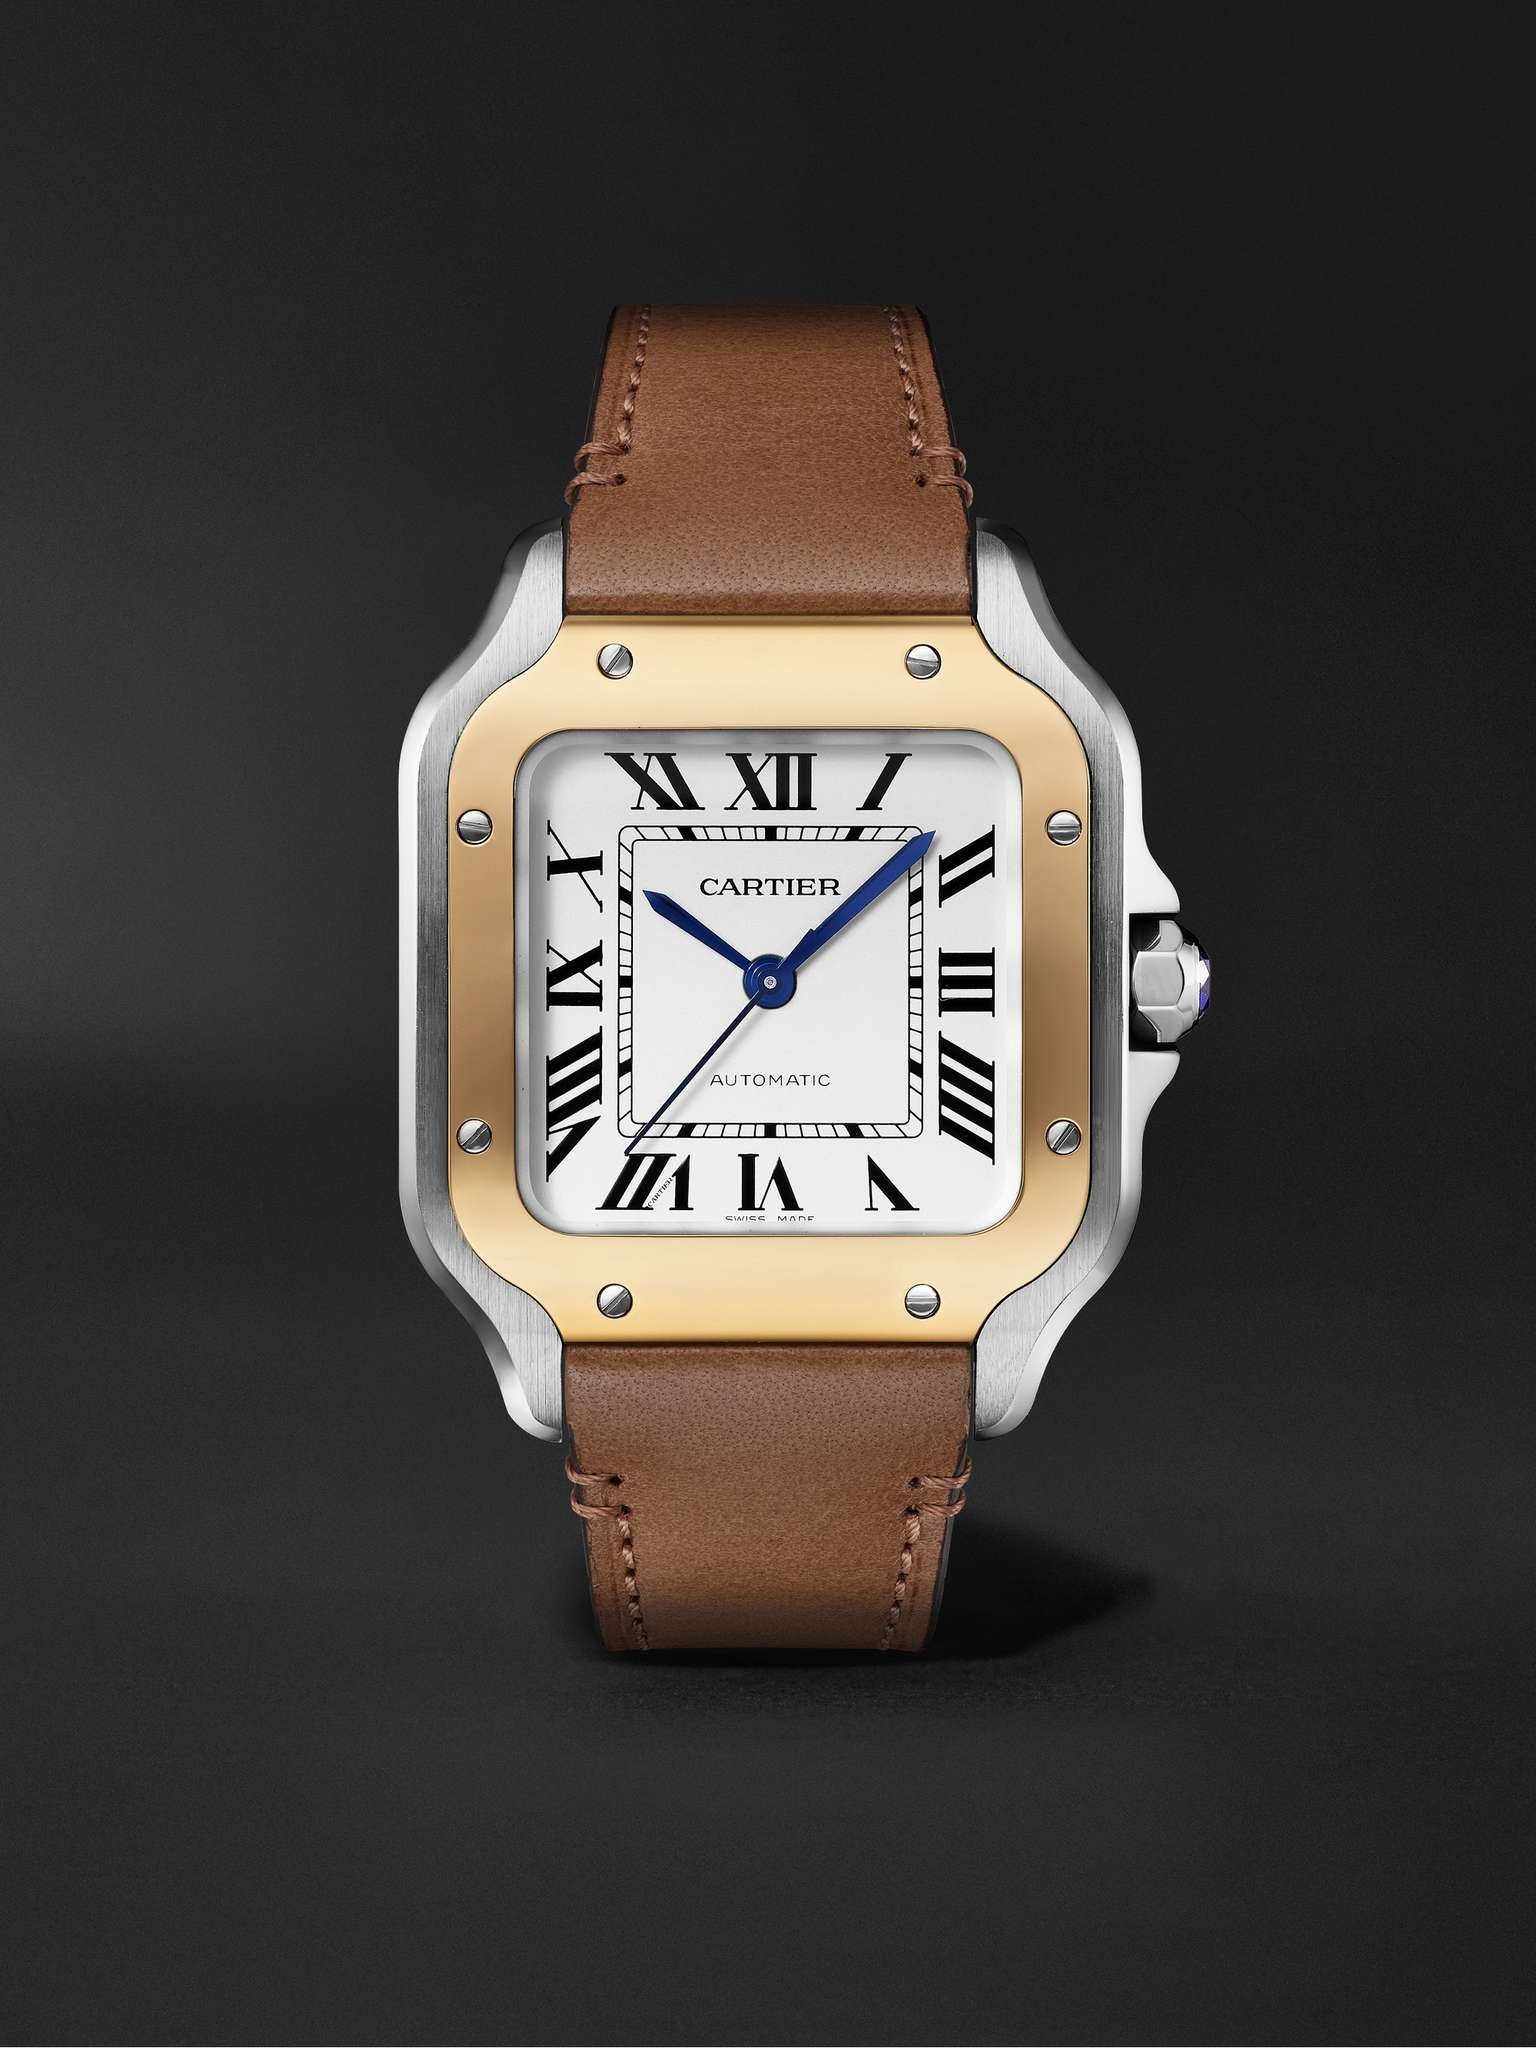 Santos de Cartier Automatic 35.1mm Interchangeable 18-Karat Gold, Stainless Steel and Leather Watch, - 9